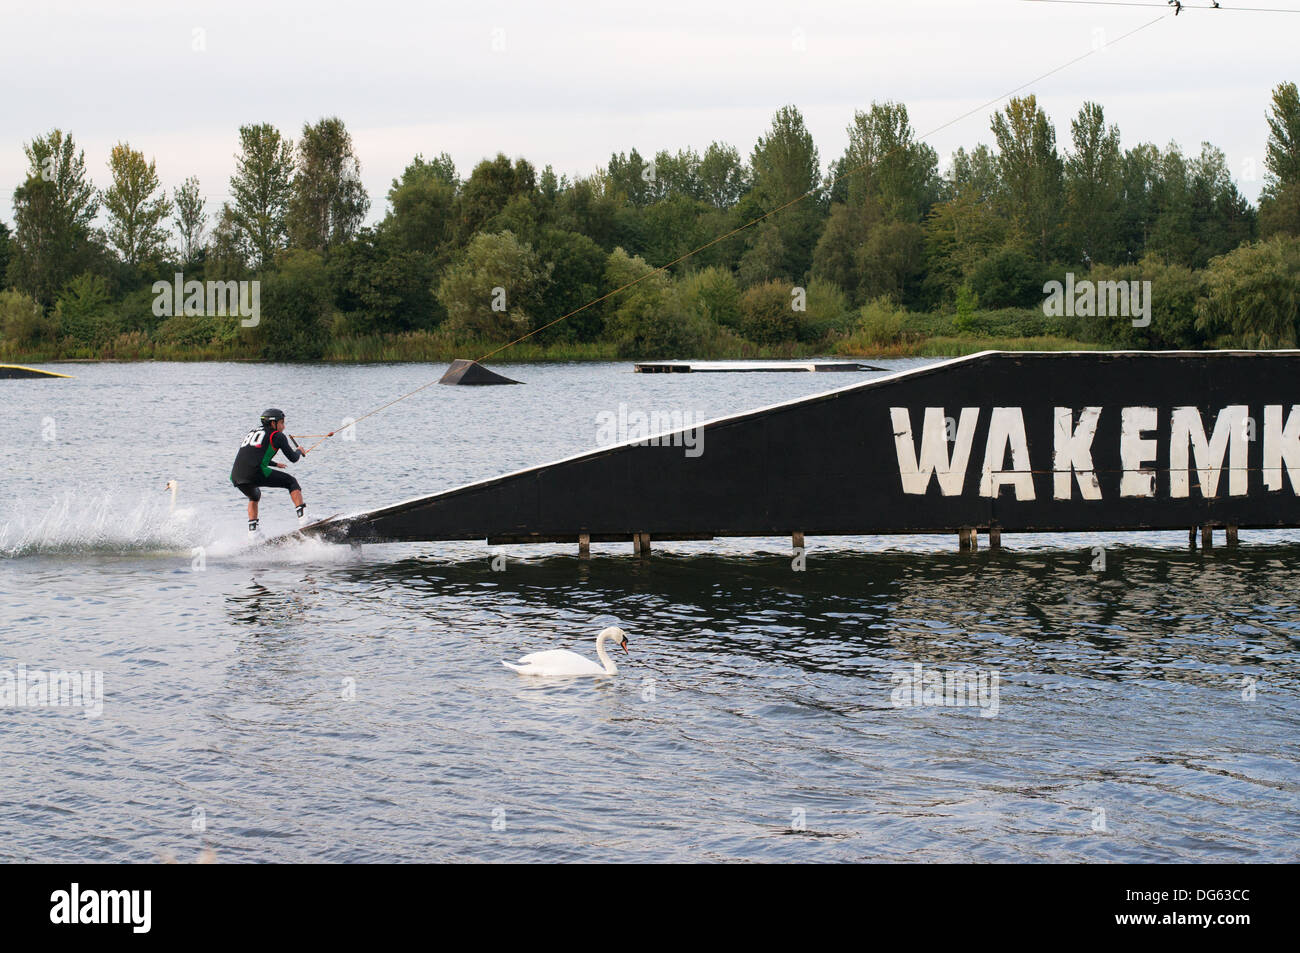 A wakeboarder about to ascend a ramp at the WAKEMK cable wakeboard and waterski centre Milton Keynes, England UK Stock Photo